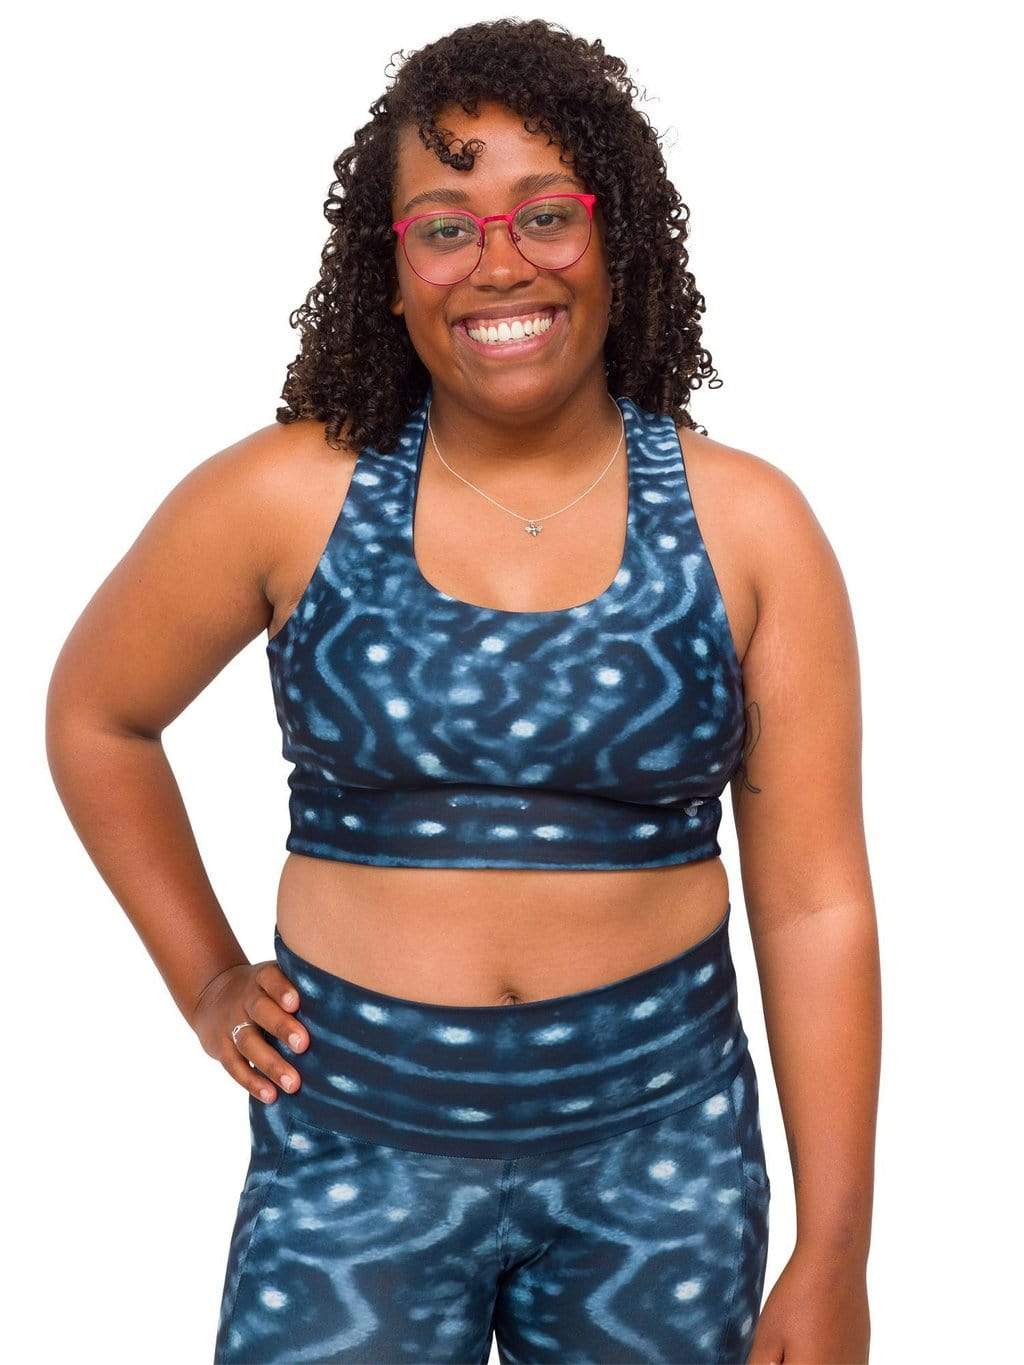 Model: Amani is the CFO of Minorities in Shark Sciences and a shark scientist. She is 5&#39;3&quot;, 160 lbs, 36C and is wearing a M legging and L top.